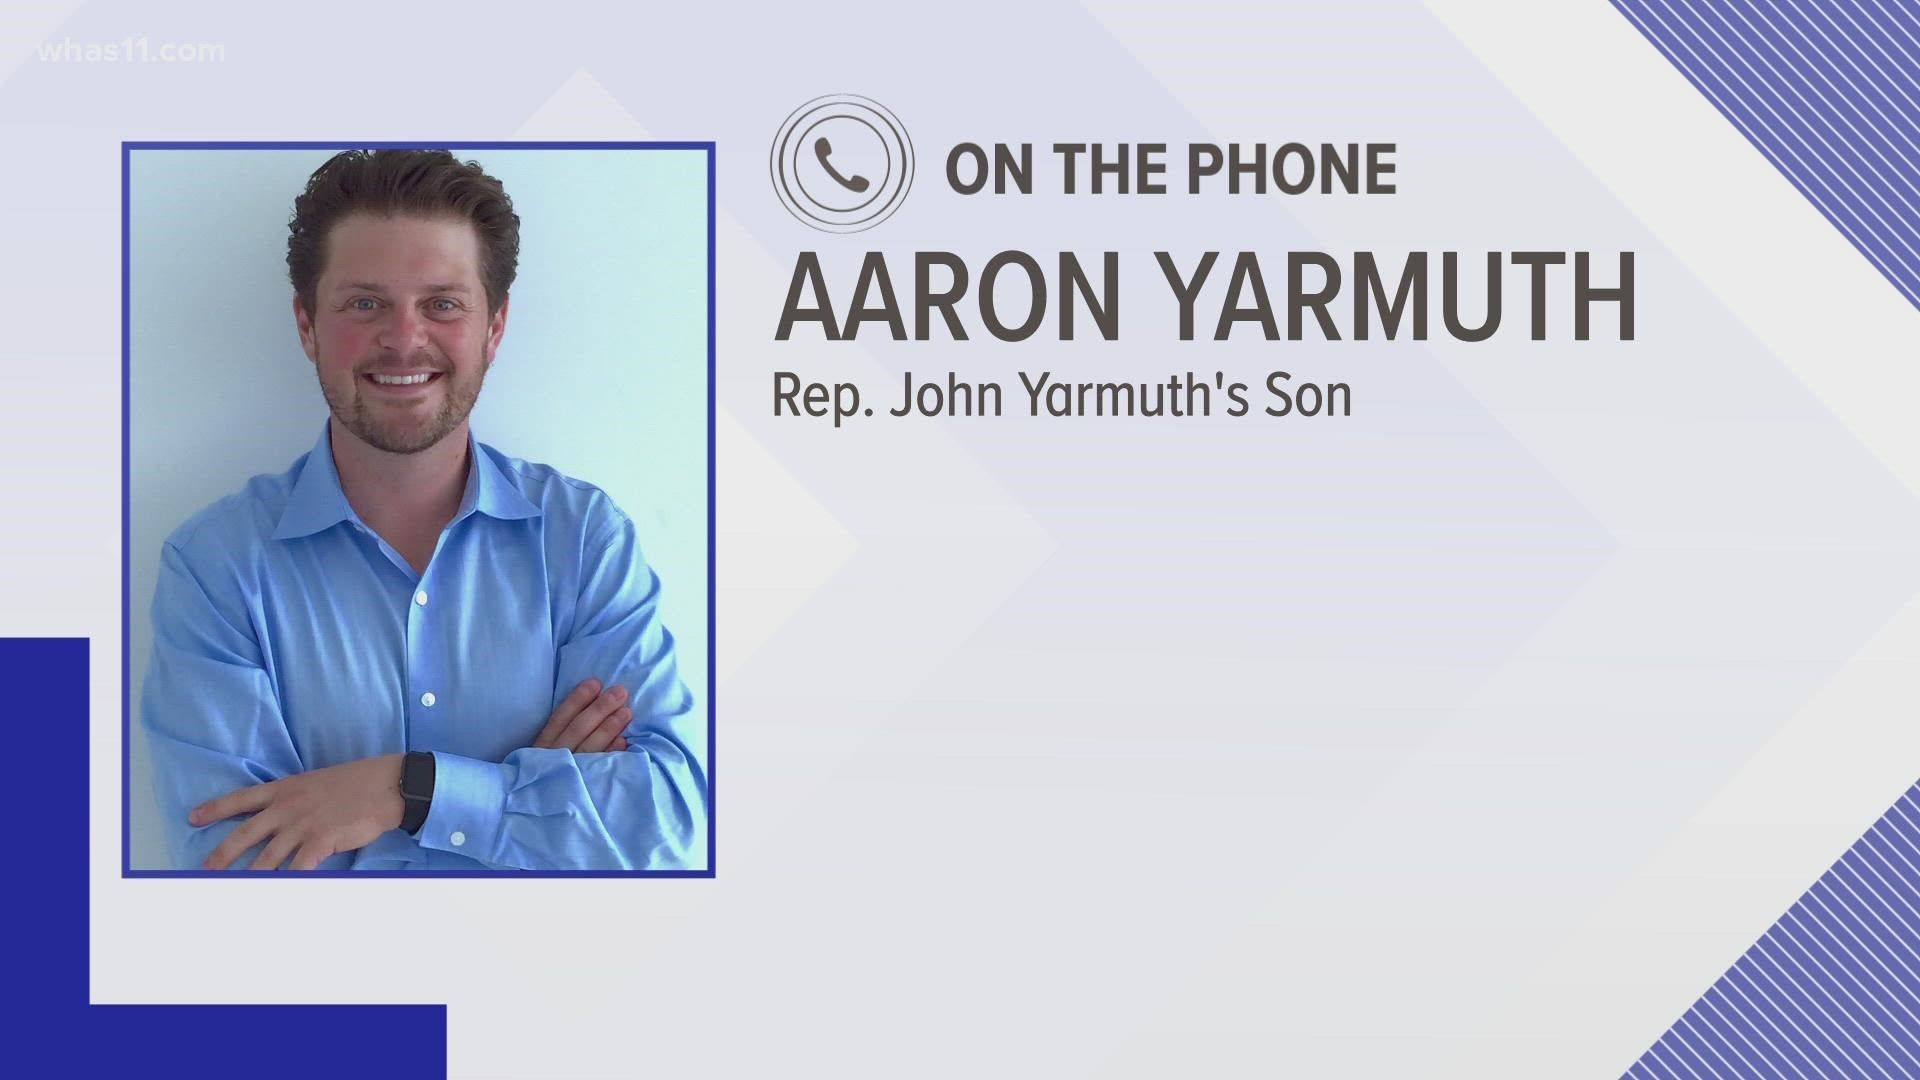 Aaron Yarmuth spoke with anchor Doug Proffitt about the possibility of running for the 3rd Congressional District seat when his dad retires.